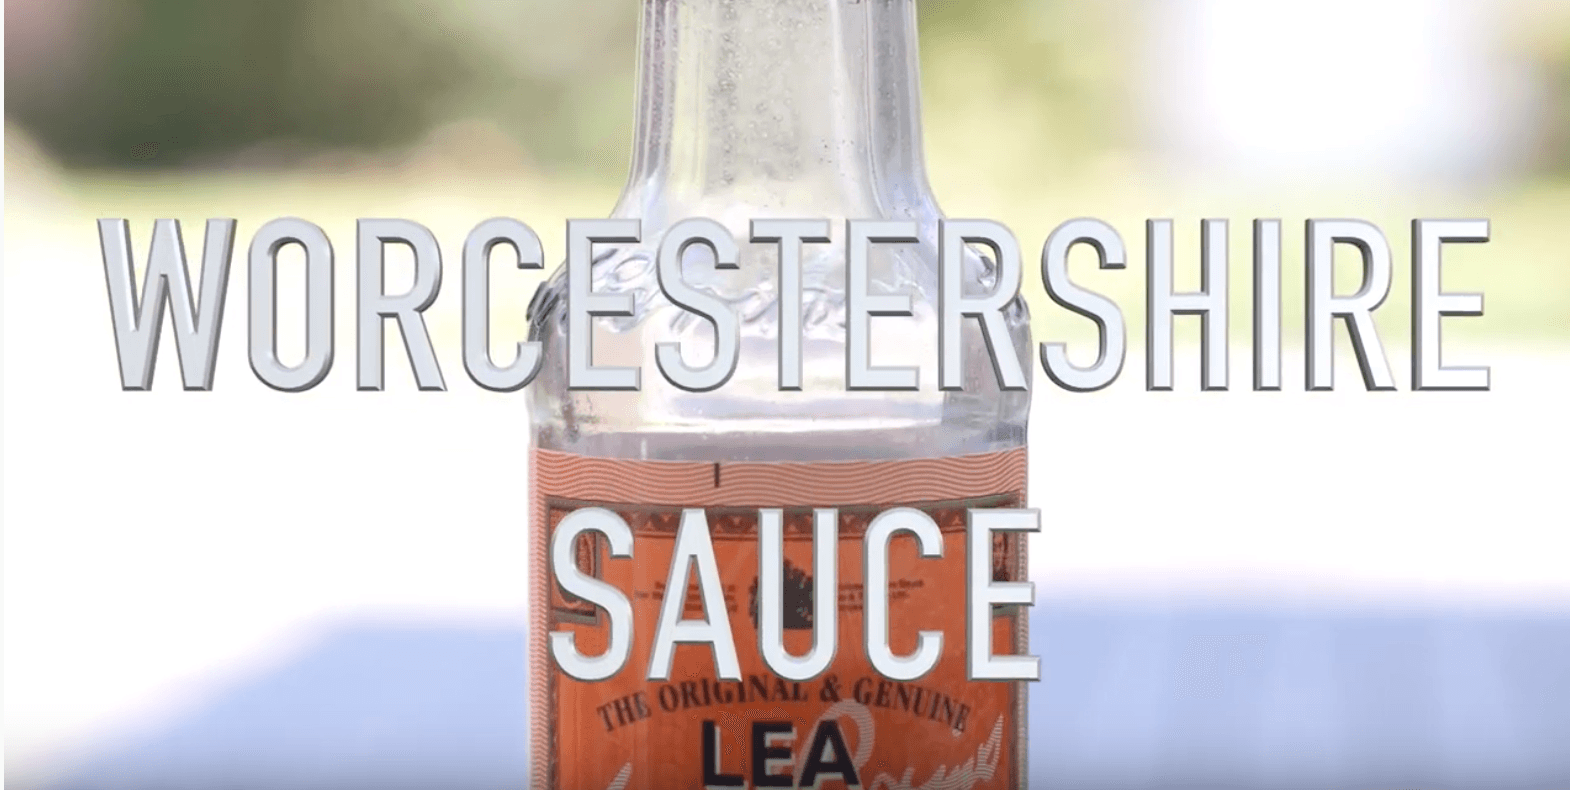 Easy Vegan Hack 17 for Veganuary - Worcestershire Sauce Substitute